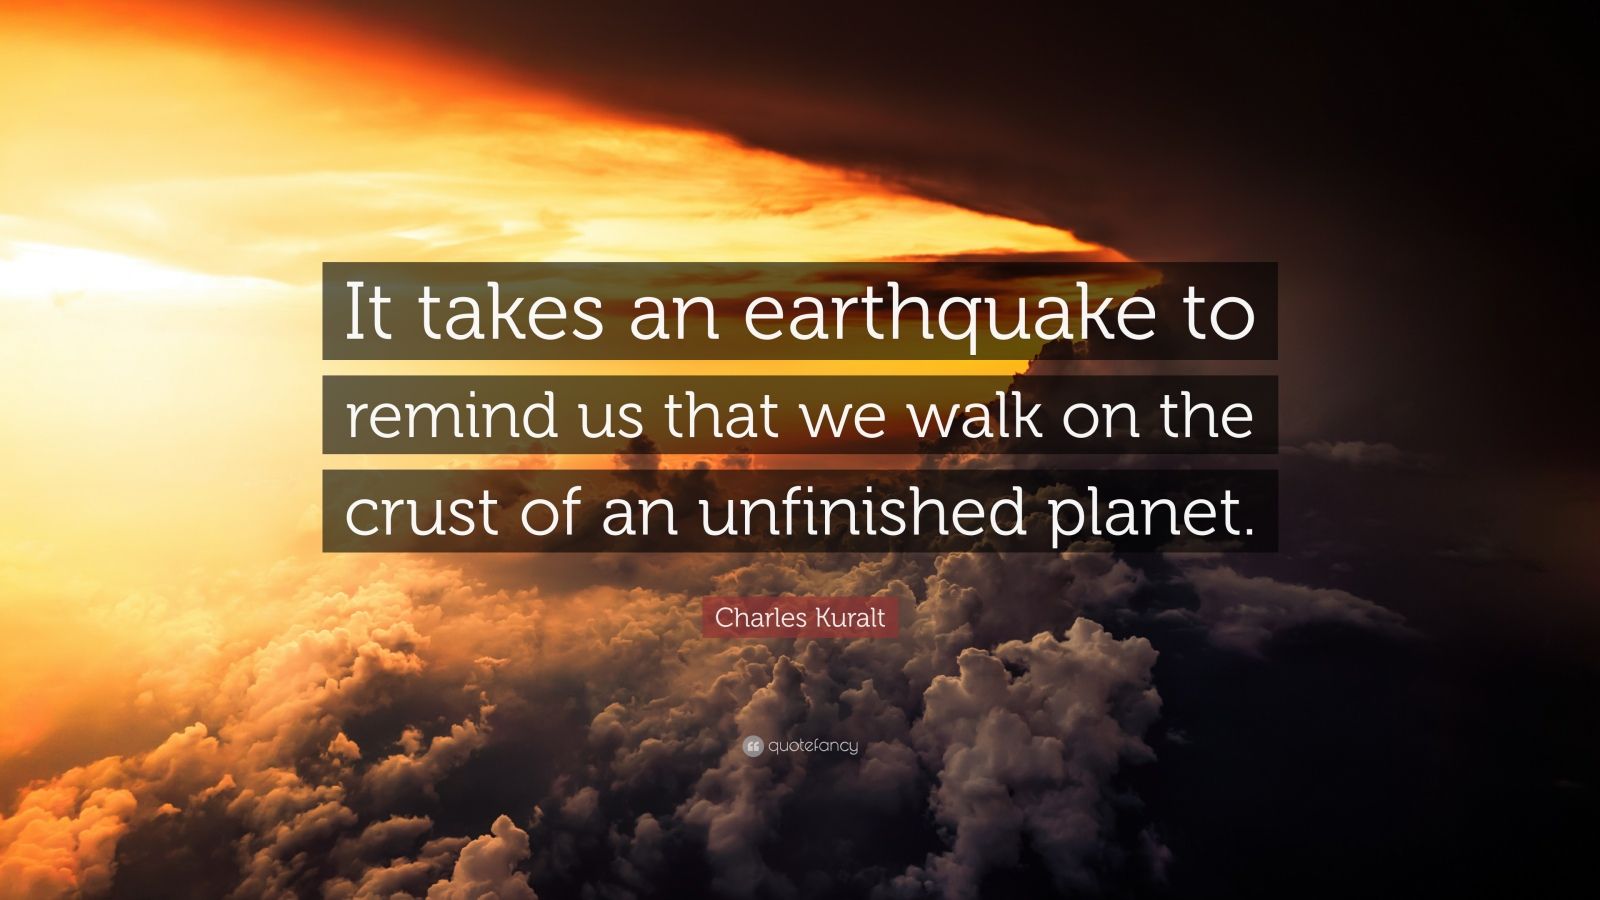 Charles Kuralt Quote: “It takes an earthquake to remind us that we walk